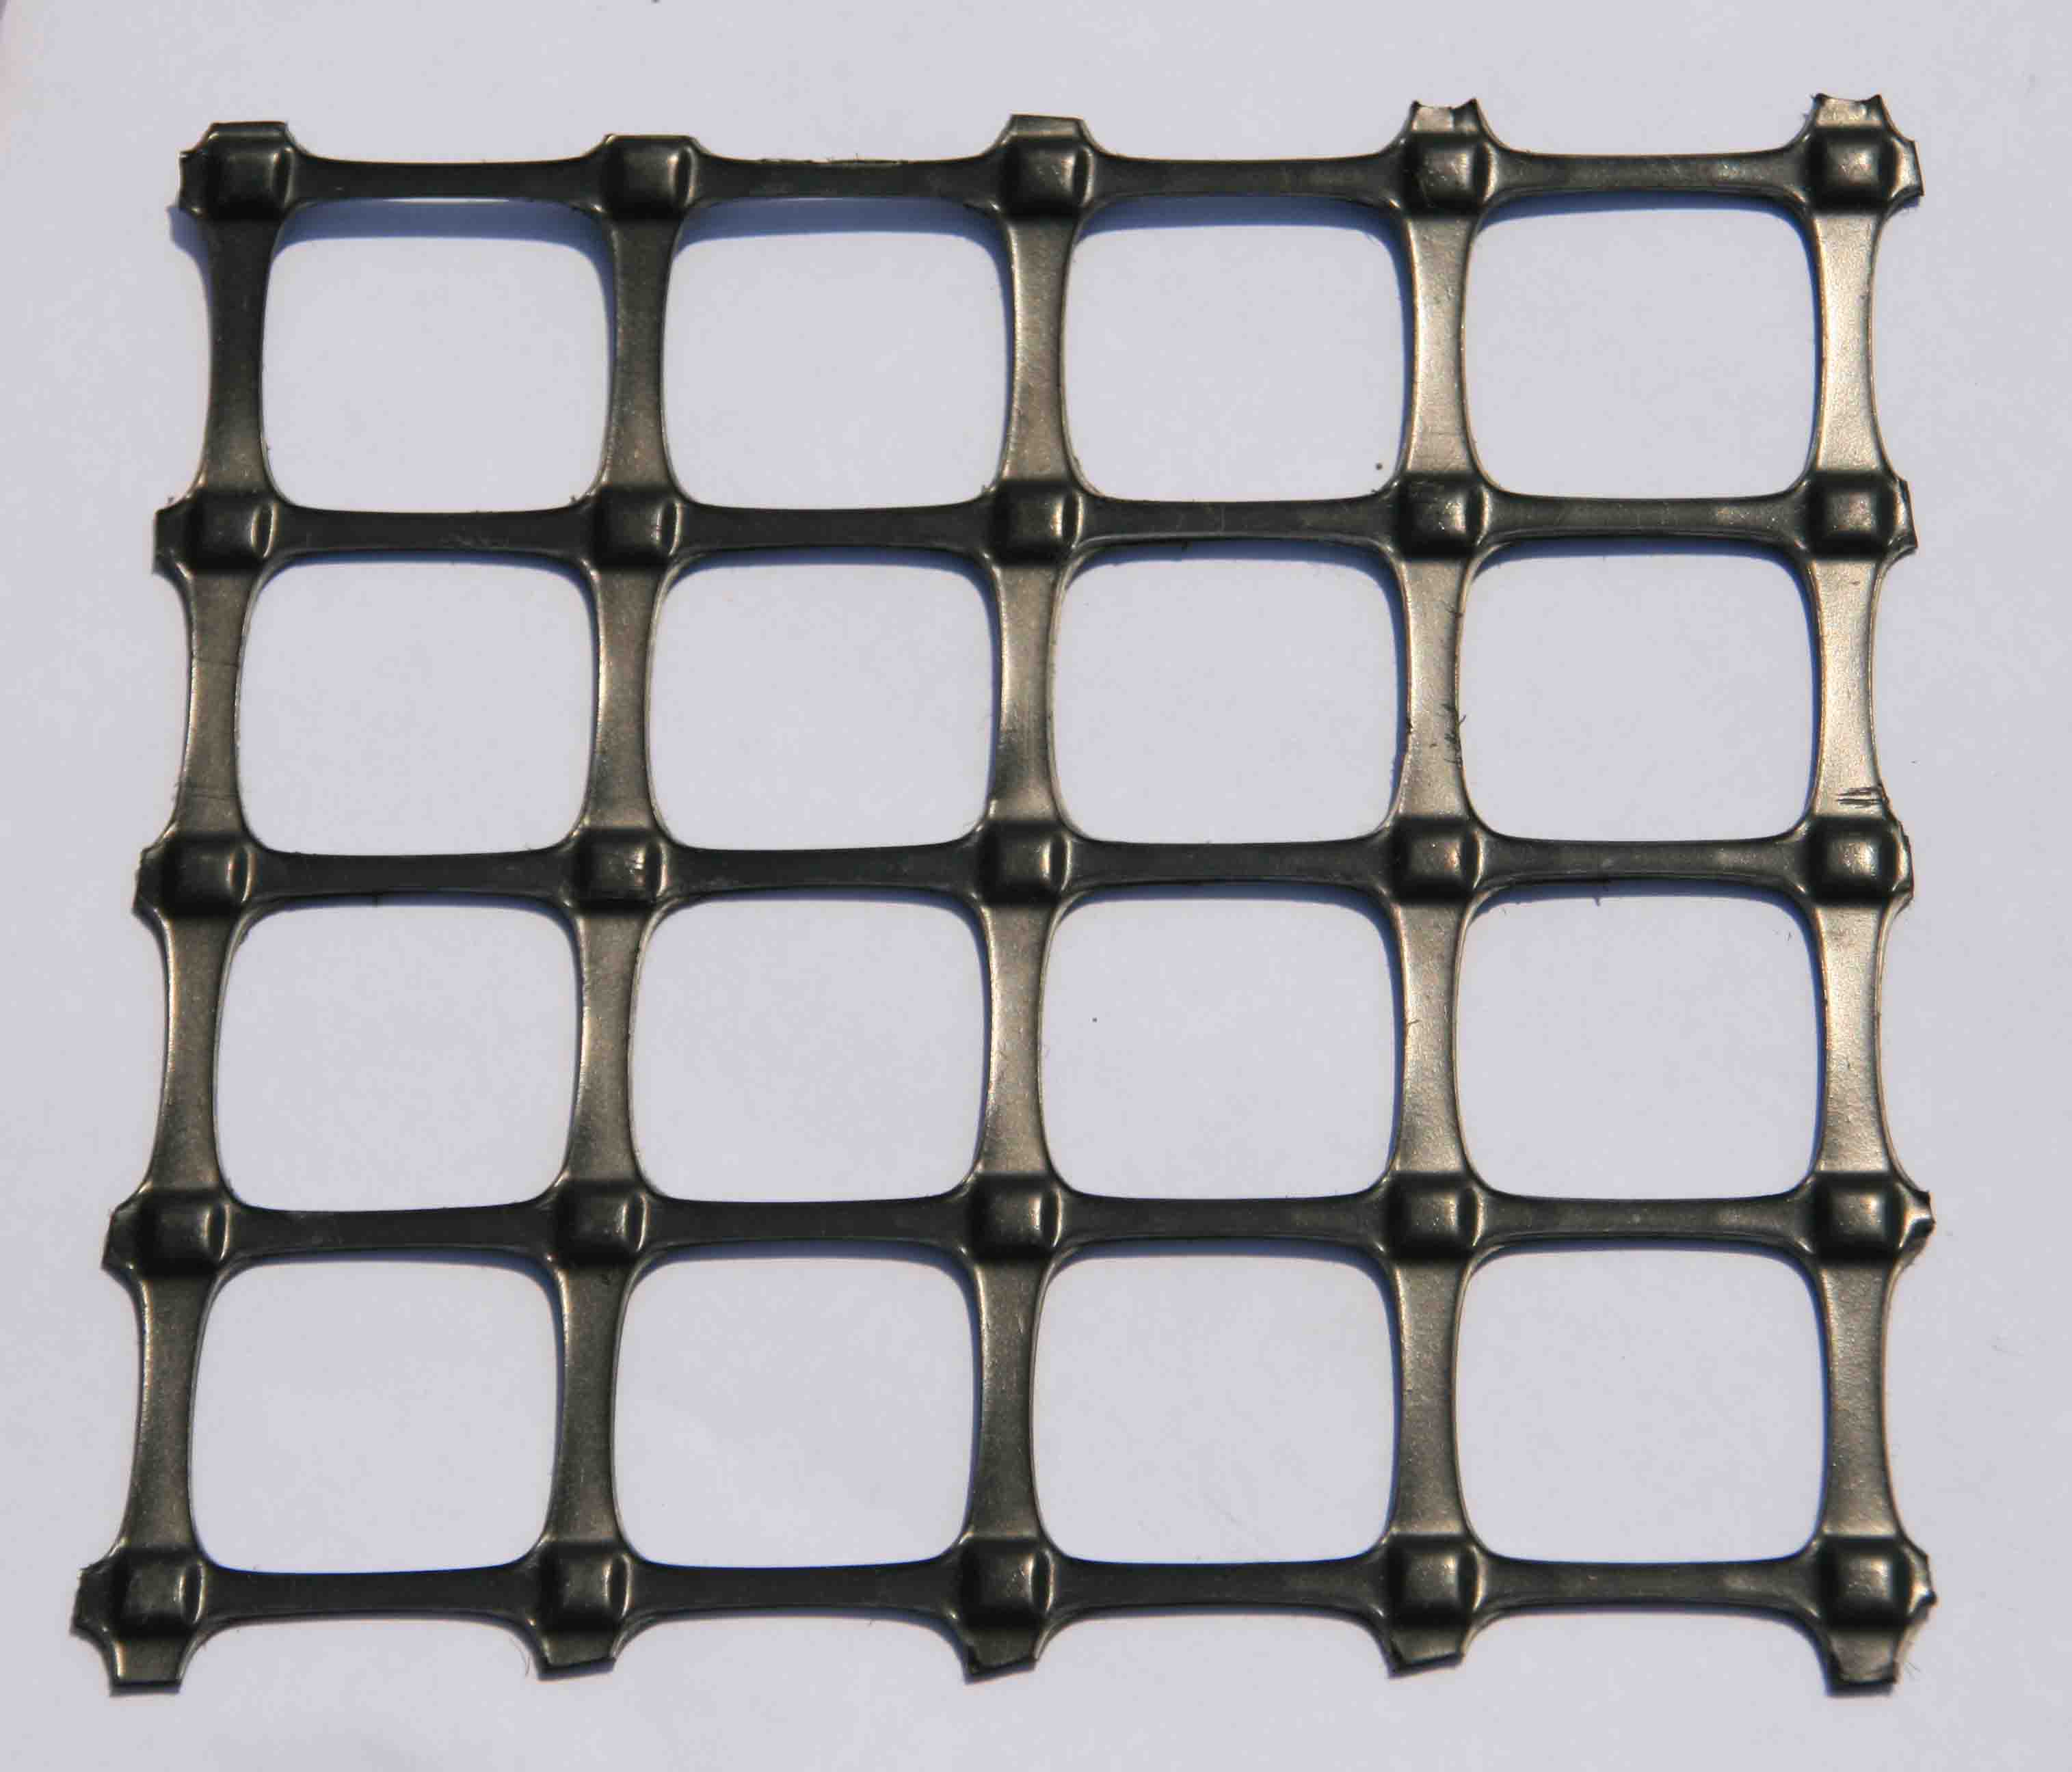 Plastic Square Mesh Gardening Trellis Of 3mm, 6mm, 15mm, 25mm, 40mm, 50mm- Extruded Flat Netting For Plant Support